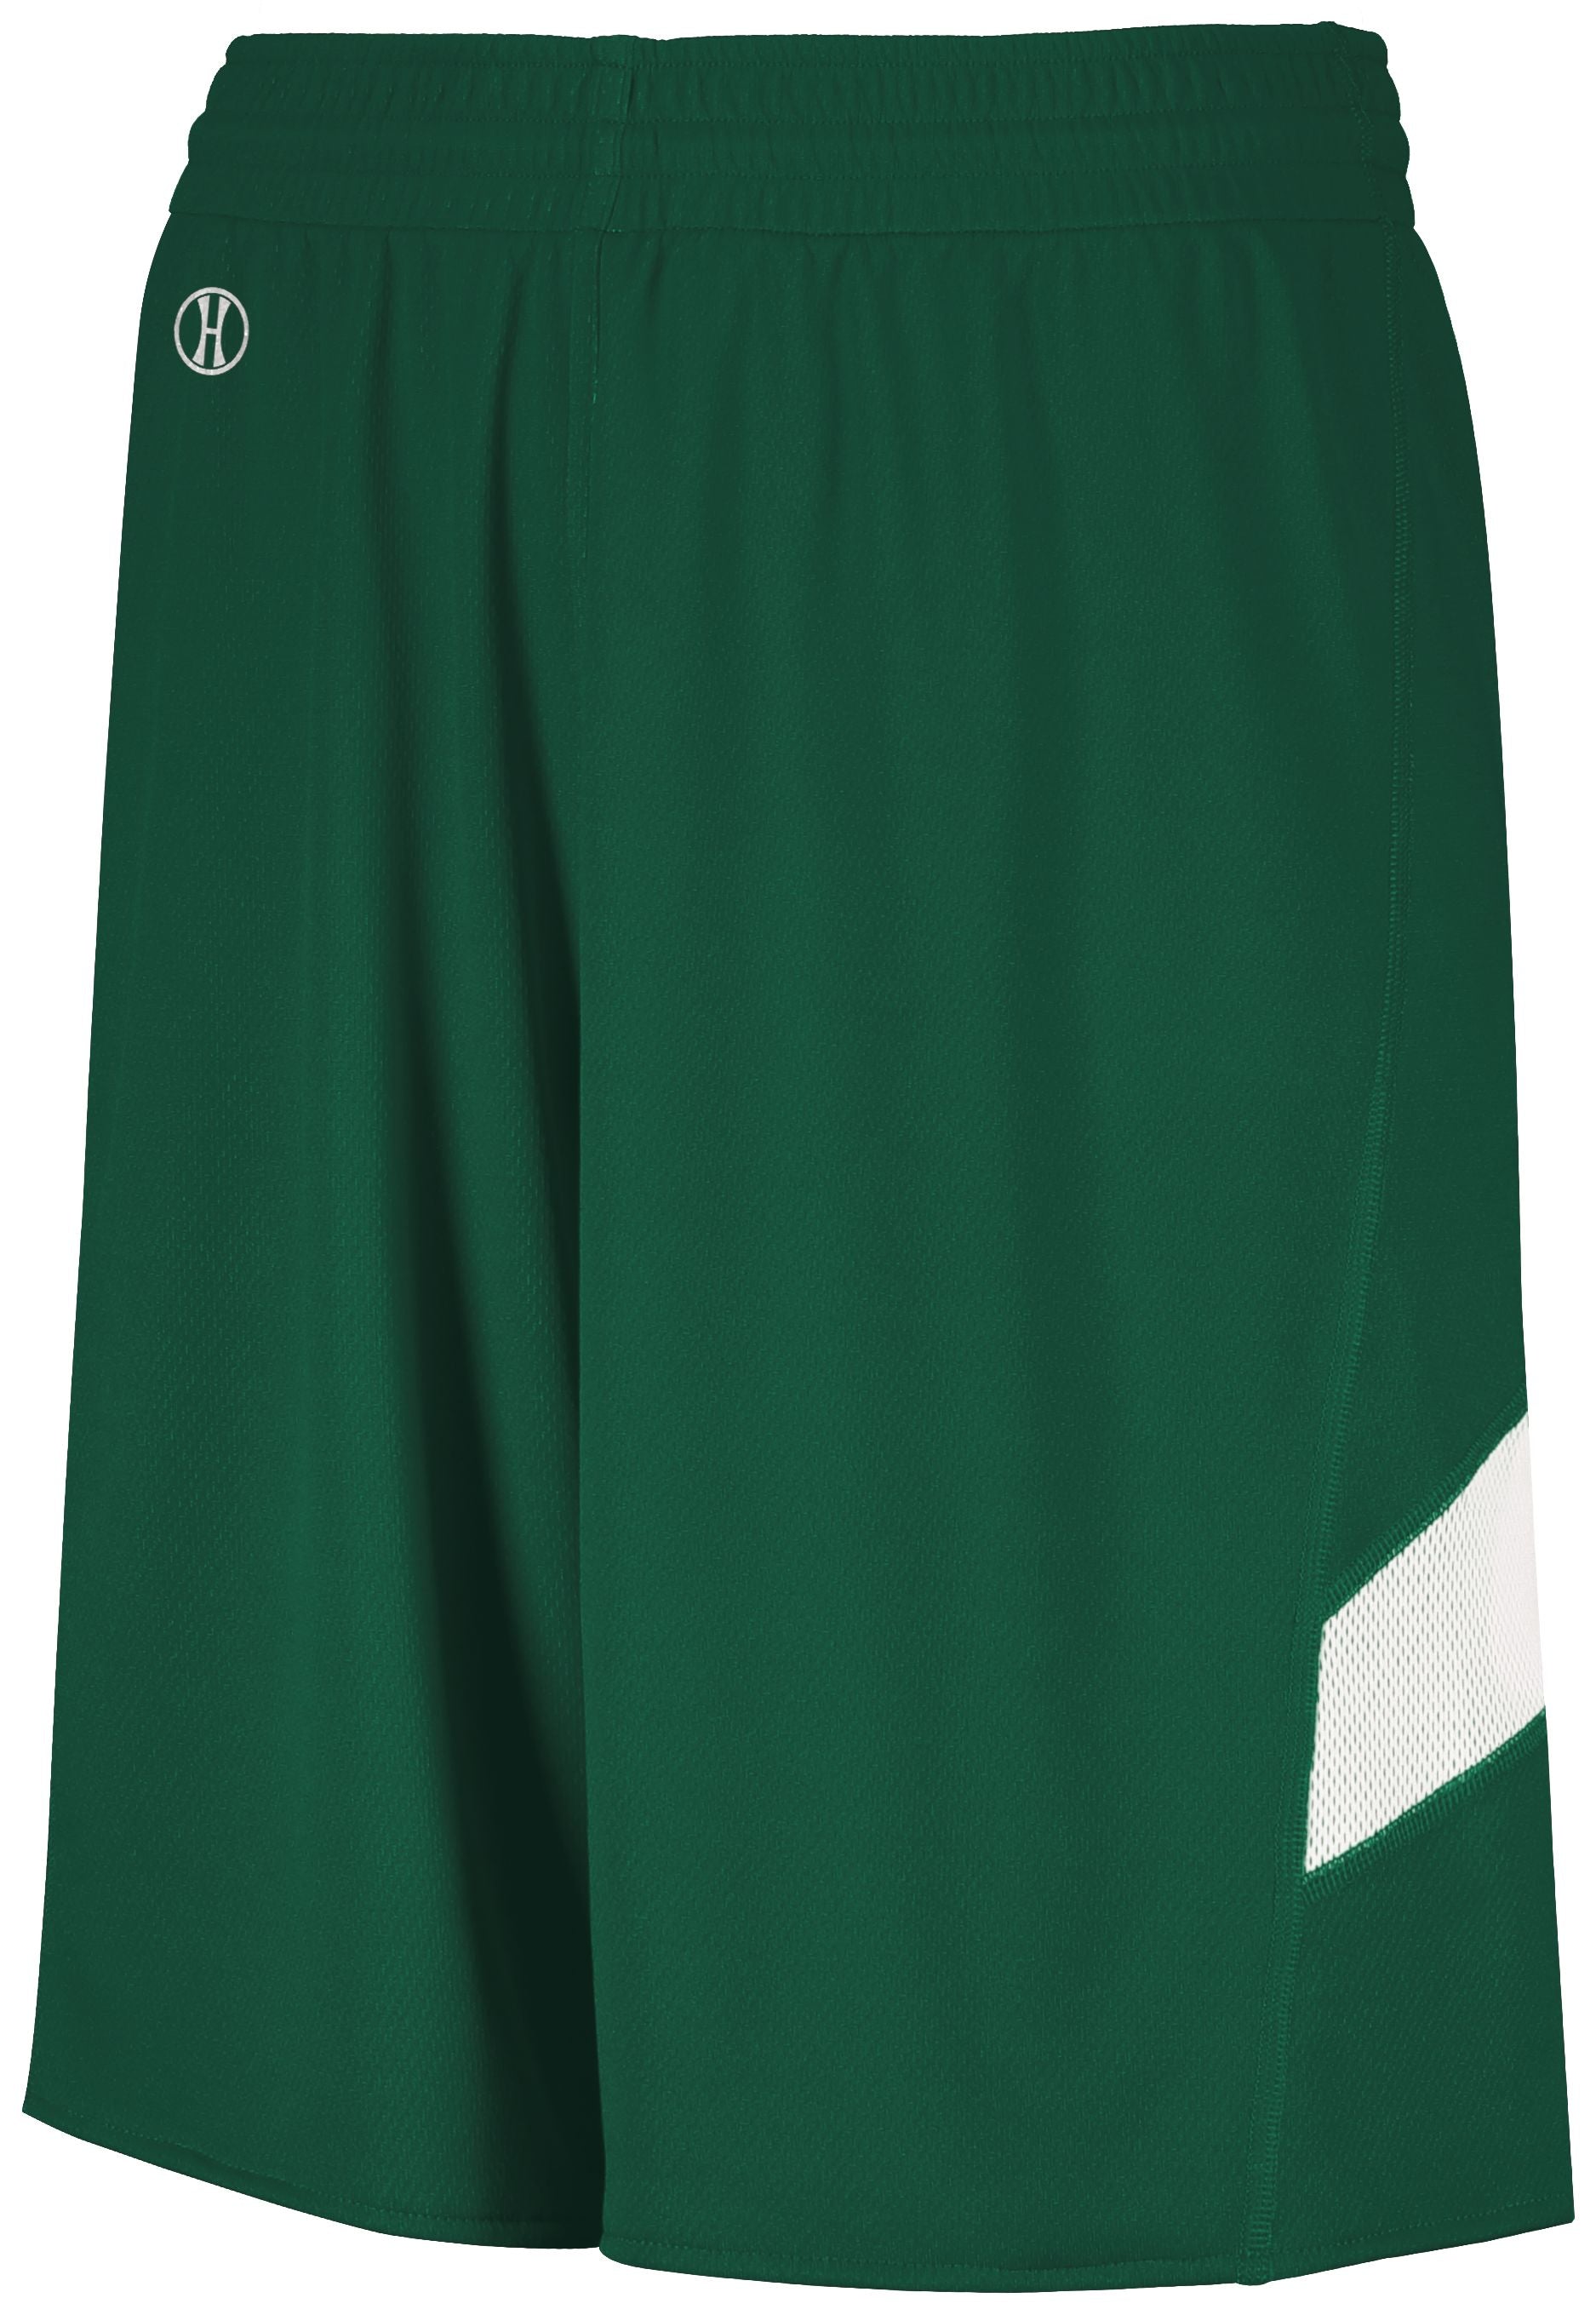 Holloway Youth Dual-Side Single Ply Basketball Shorts in Forest/White  -Part of the Youth, Youth-Shorts, Basketball, Holloway, All-Sports, All-Sports-1 product lines at KanaleyCreations.com